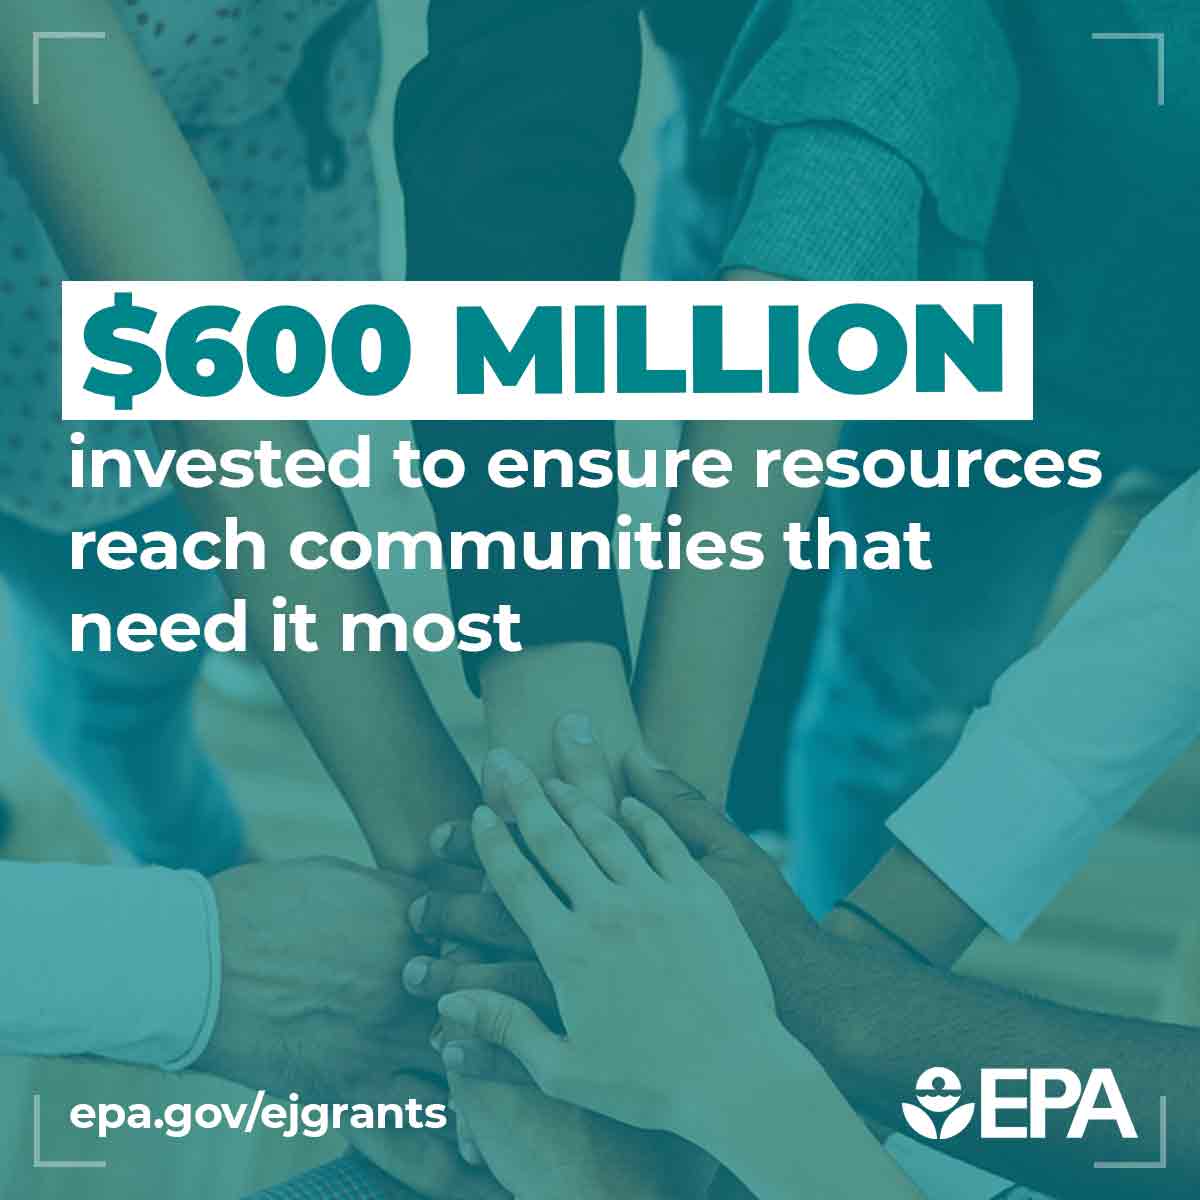 🌎💚 Happy #EarthDay! We've been selected as the @EPAnorthwest region 10 grantmaker for the Environmental Justice Thriving Communities Grantmaking program! Chosen as one of 11 grantmakers, we will issue subgrants for environmental projects while reducing barriers to federal funds